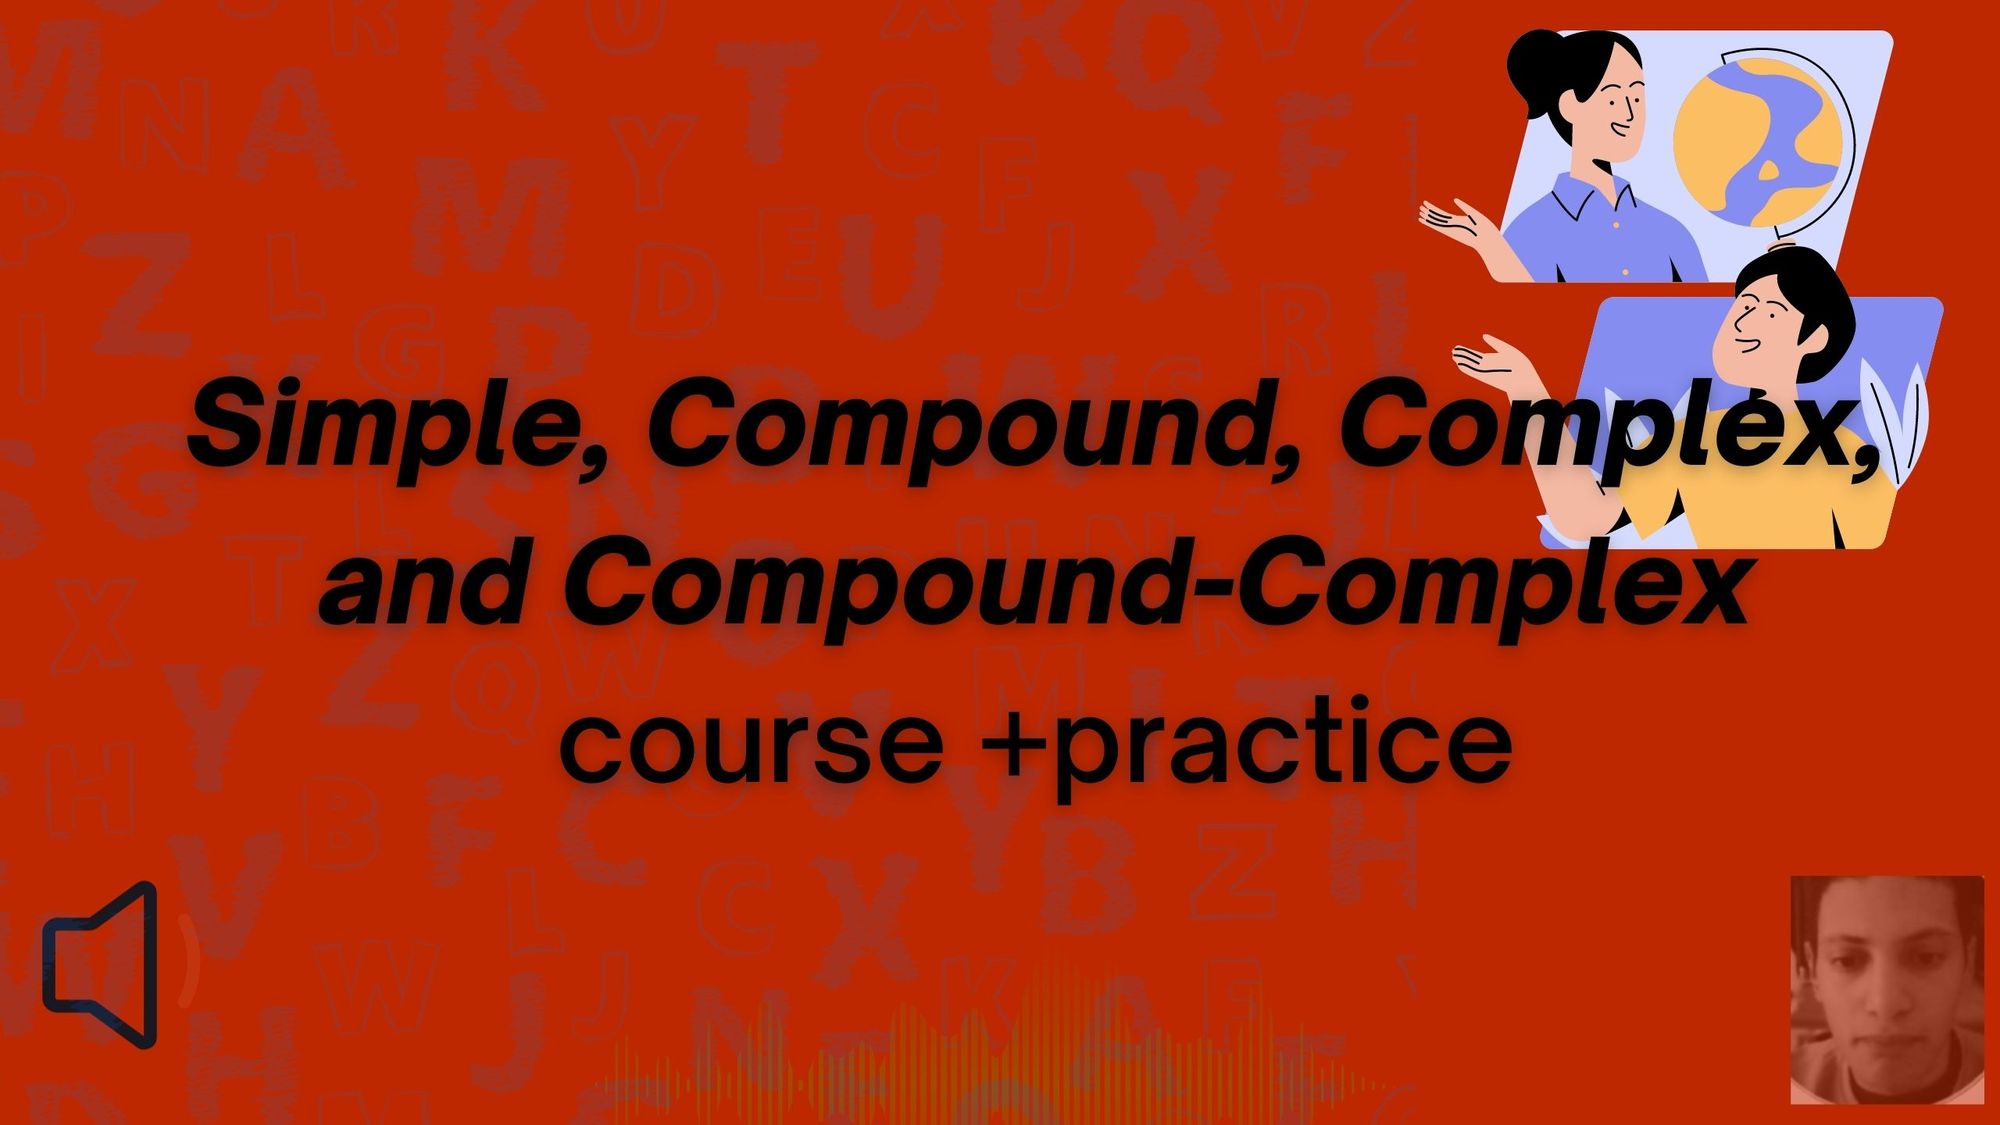 Simple, Compound, Complex, and Compound-Complex courses with practice